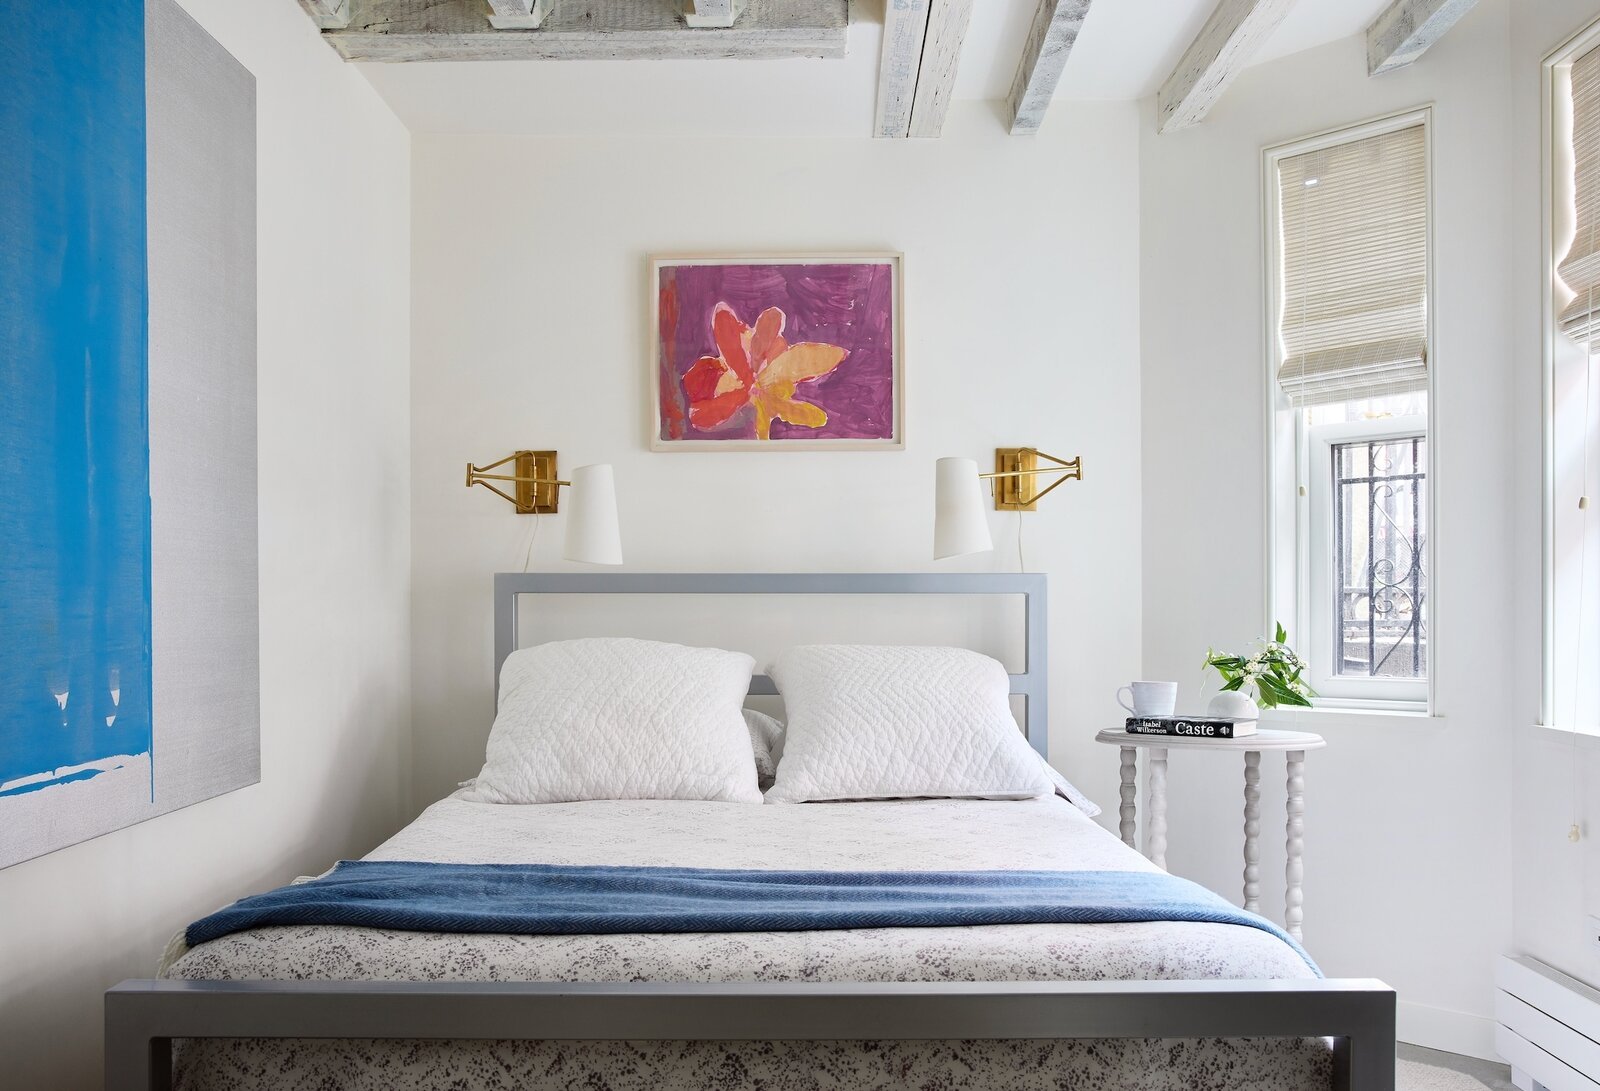  Priscilla’s 23-year-old daughter sleeps here when she visits from the West Coast. The flower painting above the bed is her childhood artwork, and the blue painting is by New York City artist John Zinsser.&nbsp; 